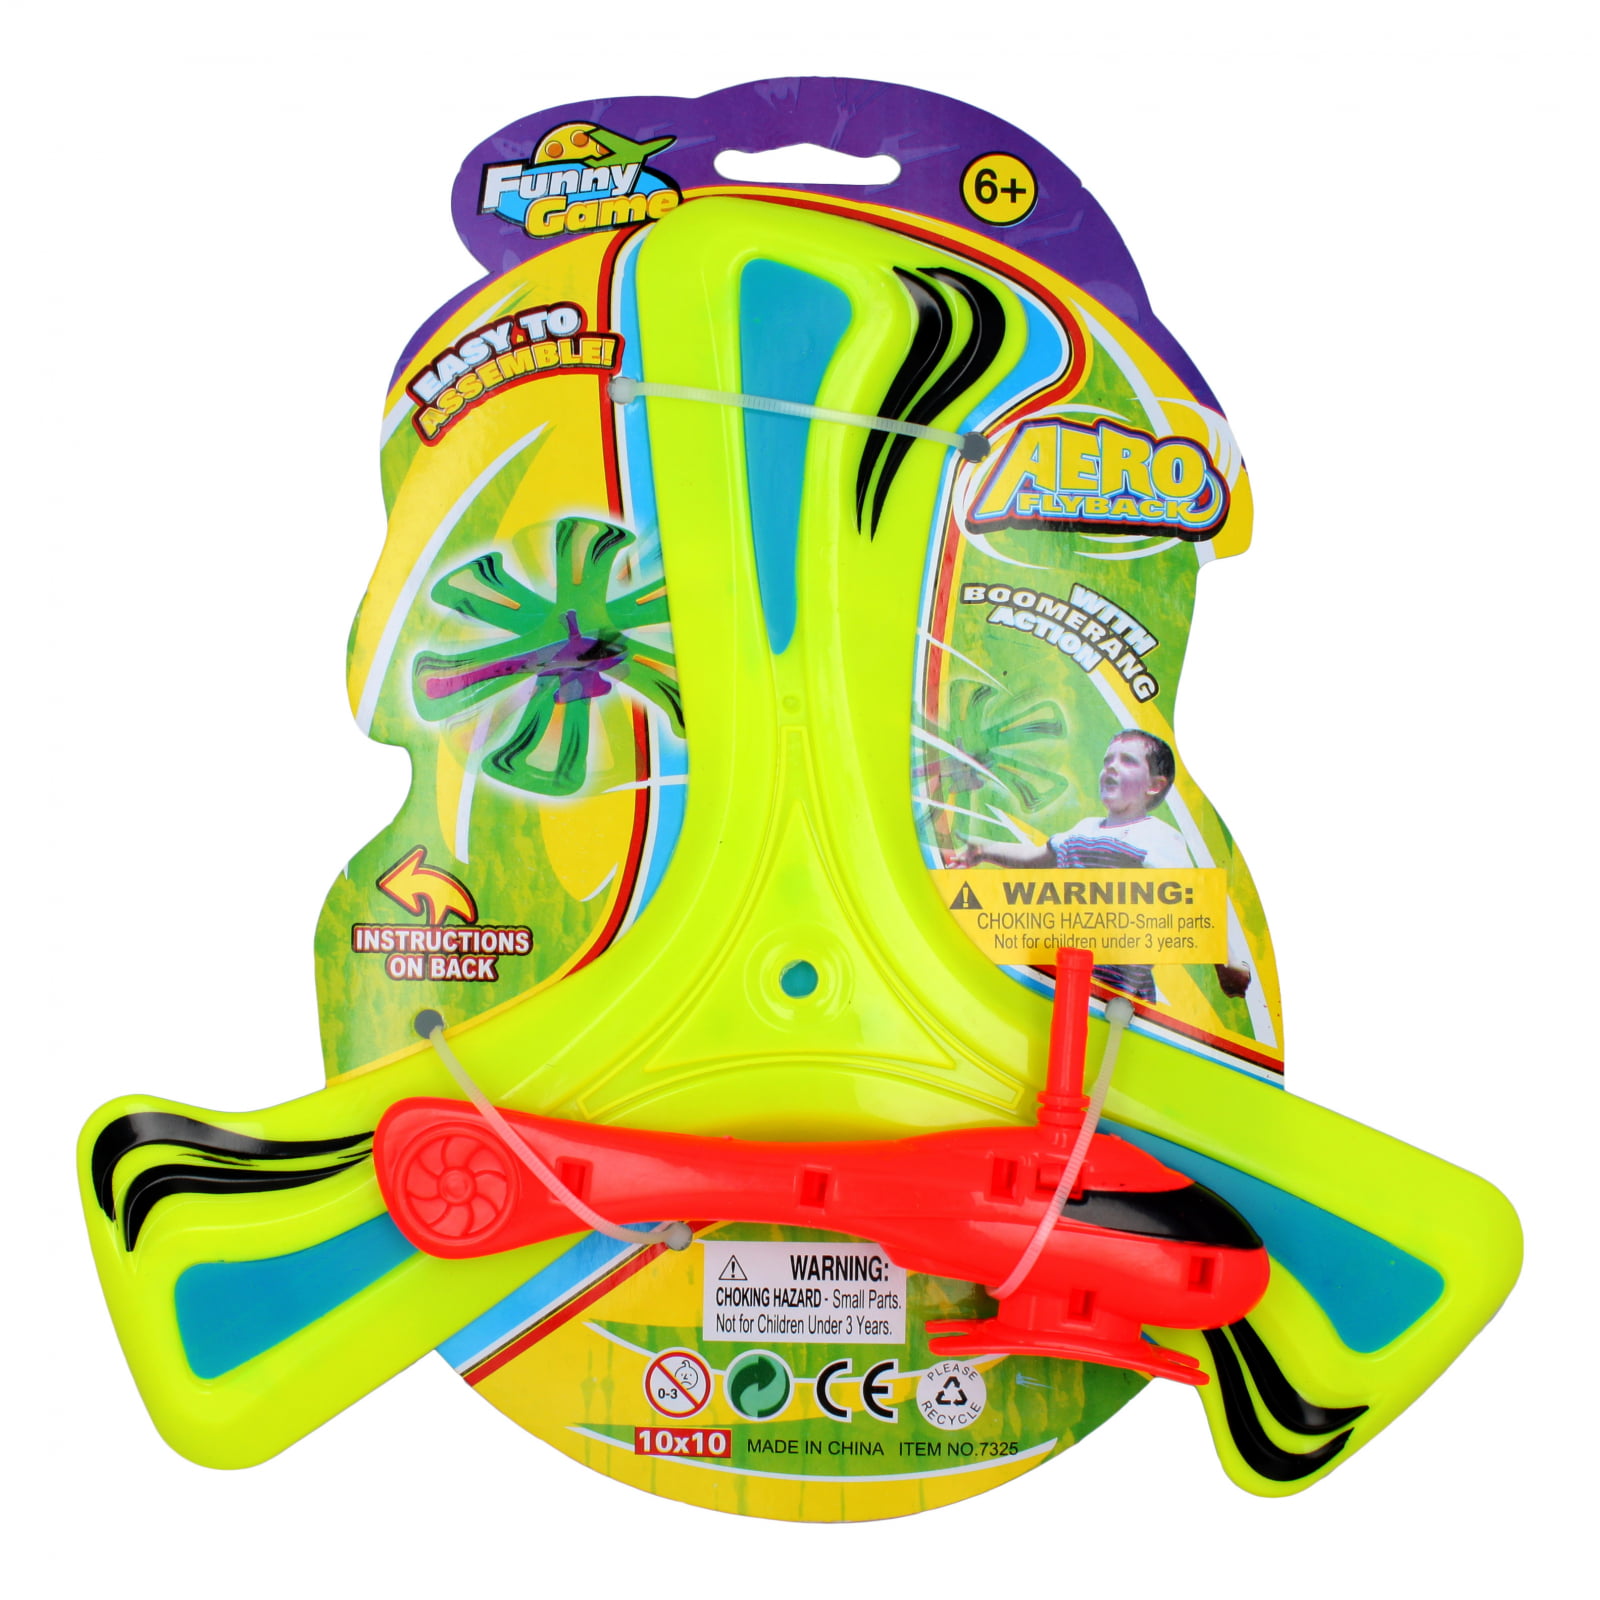 HELICOPTER SKY FLYER BOOMERANG FRISBEE GARDEN TOY BIRTHDAY PARTY GIFT 